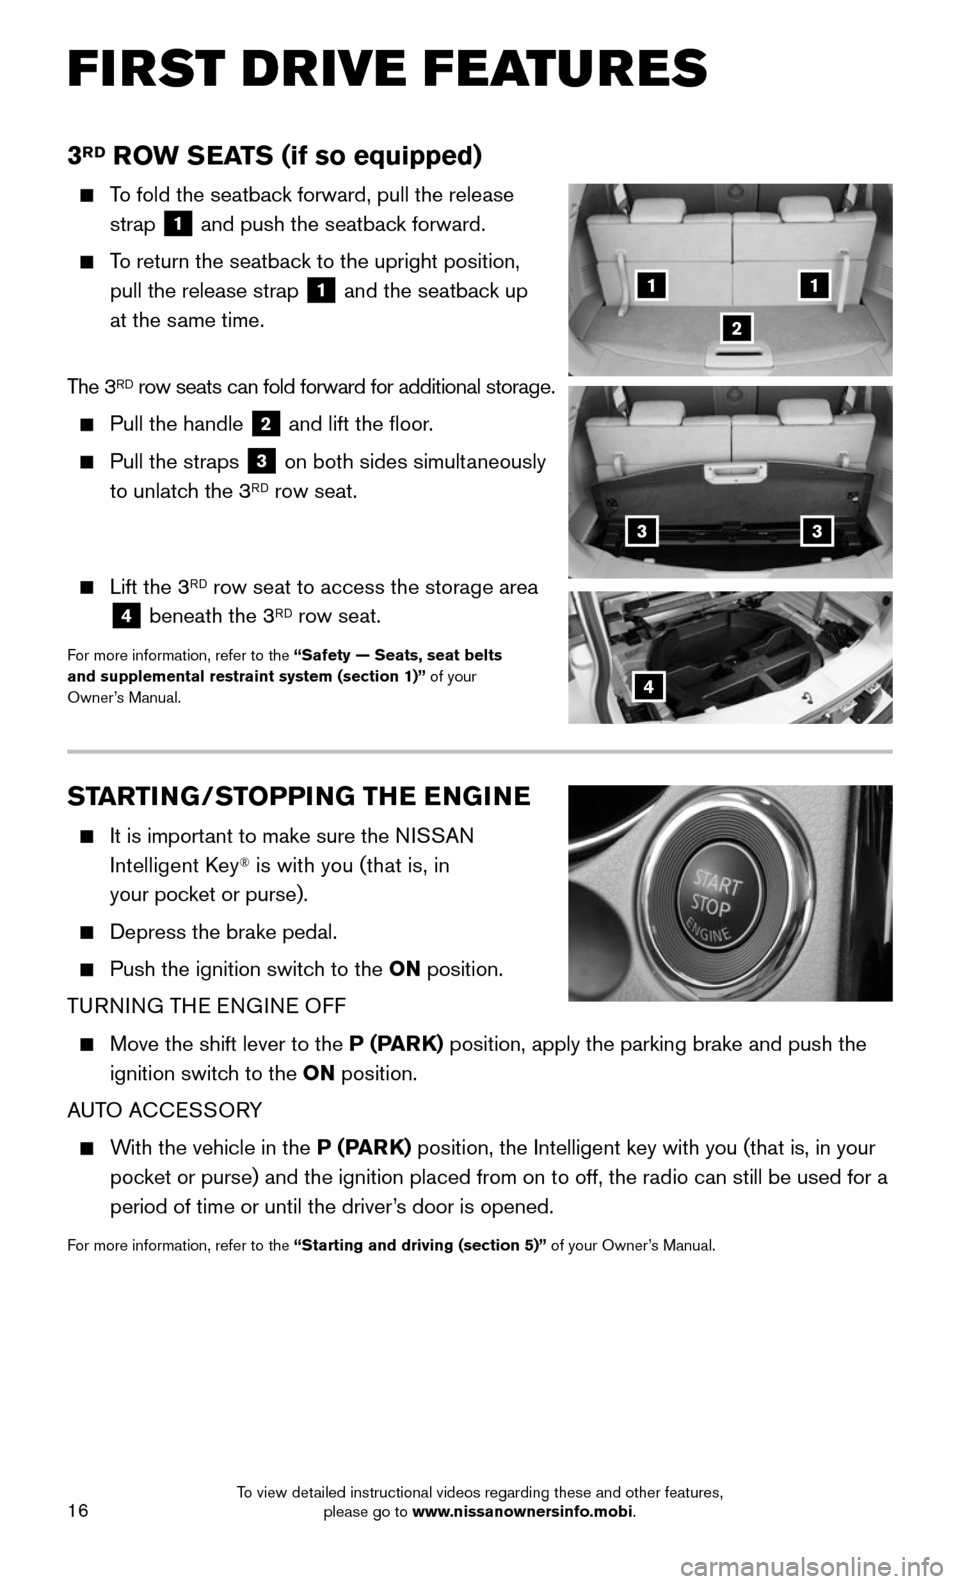 NISSAN ROGUE 2016 2.G Quick Reference Guide 16
STARTING/STOPPING THE ENGINE
    It is important to make sure the NISSAN 
Intelligent Key® is with you (that is, in   
your pocket or purse).
  Depress the brake pedal.
  Push the ignition switc h